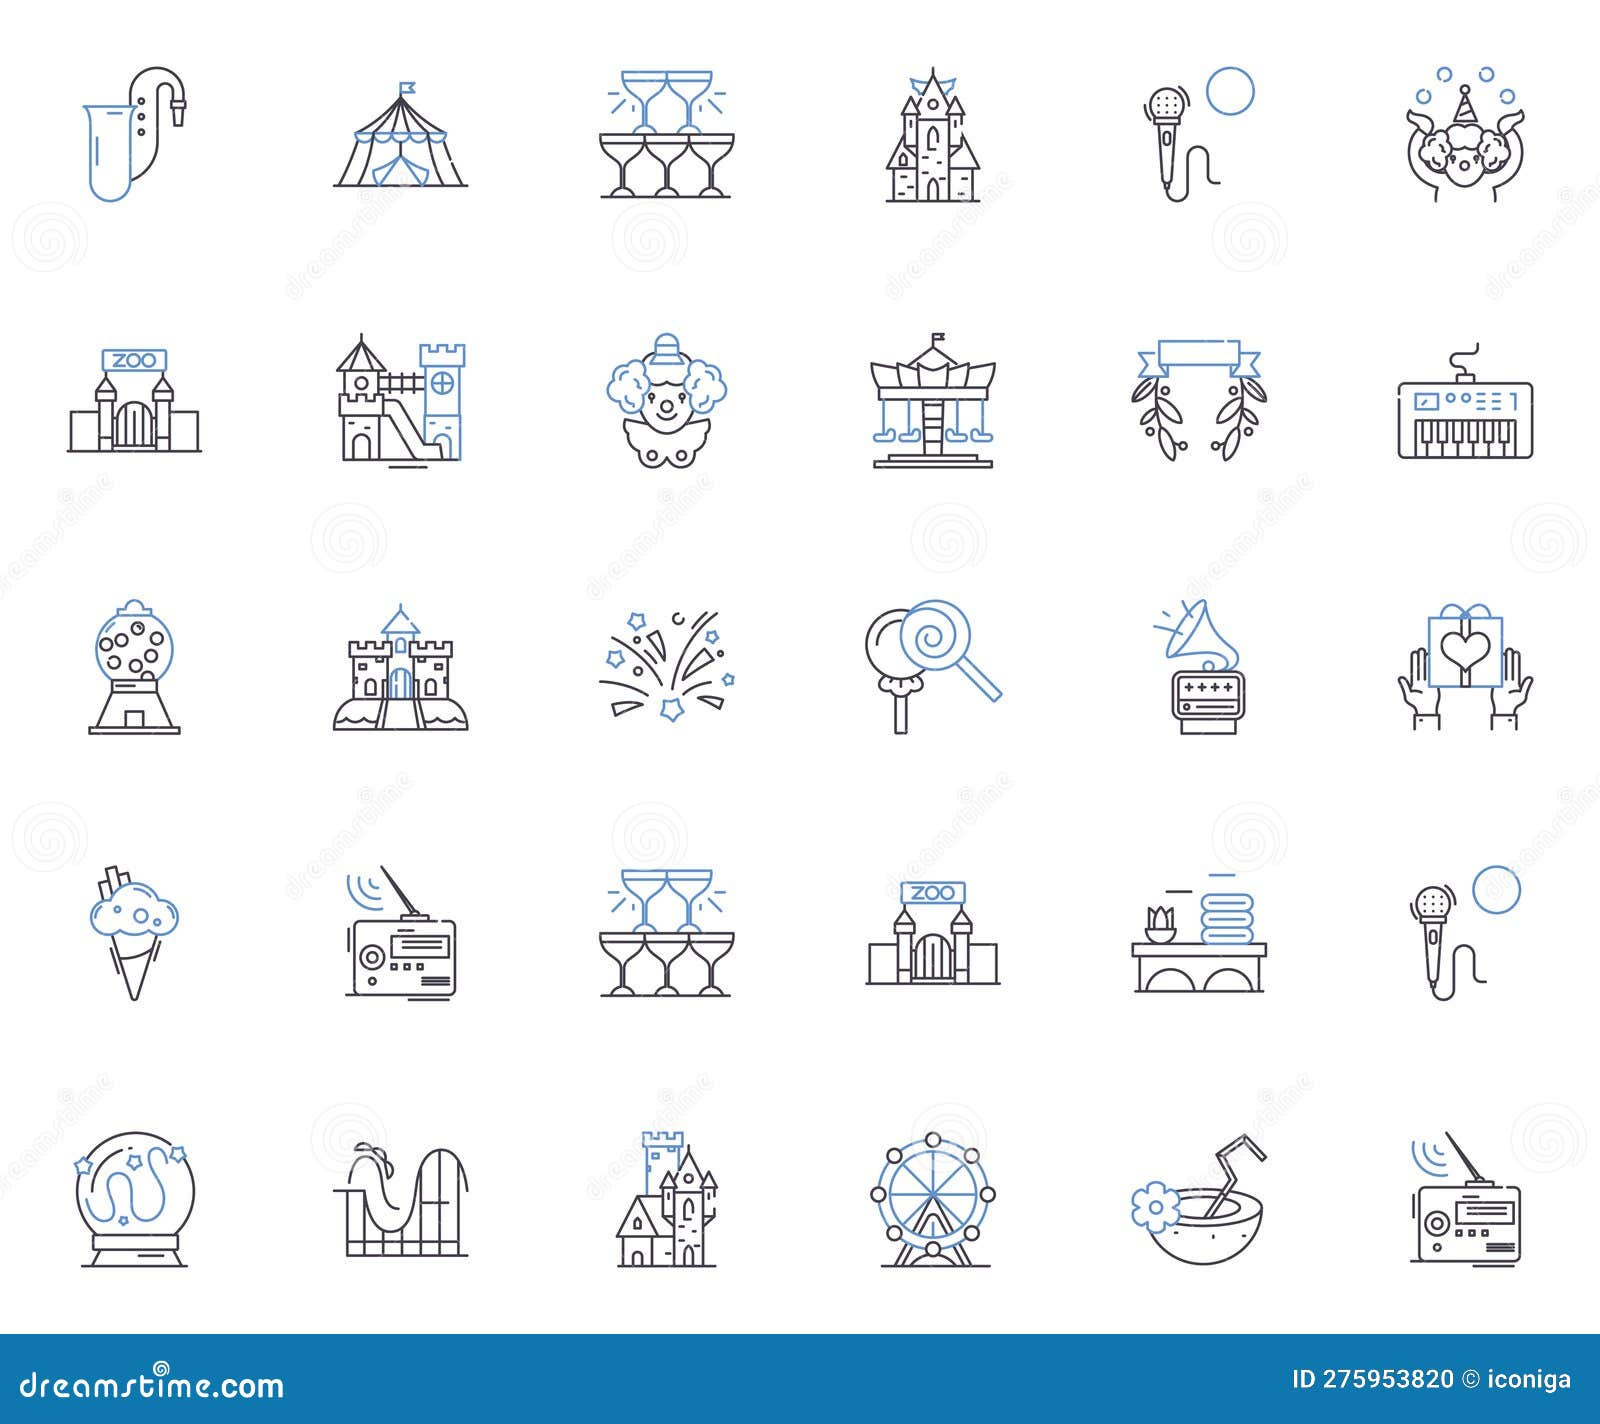 festivity line icons collection. celebration, holiday, merriment, gala, cheer, joy, revelry  and linear